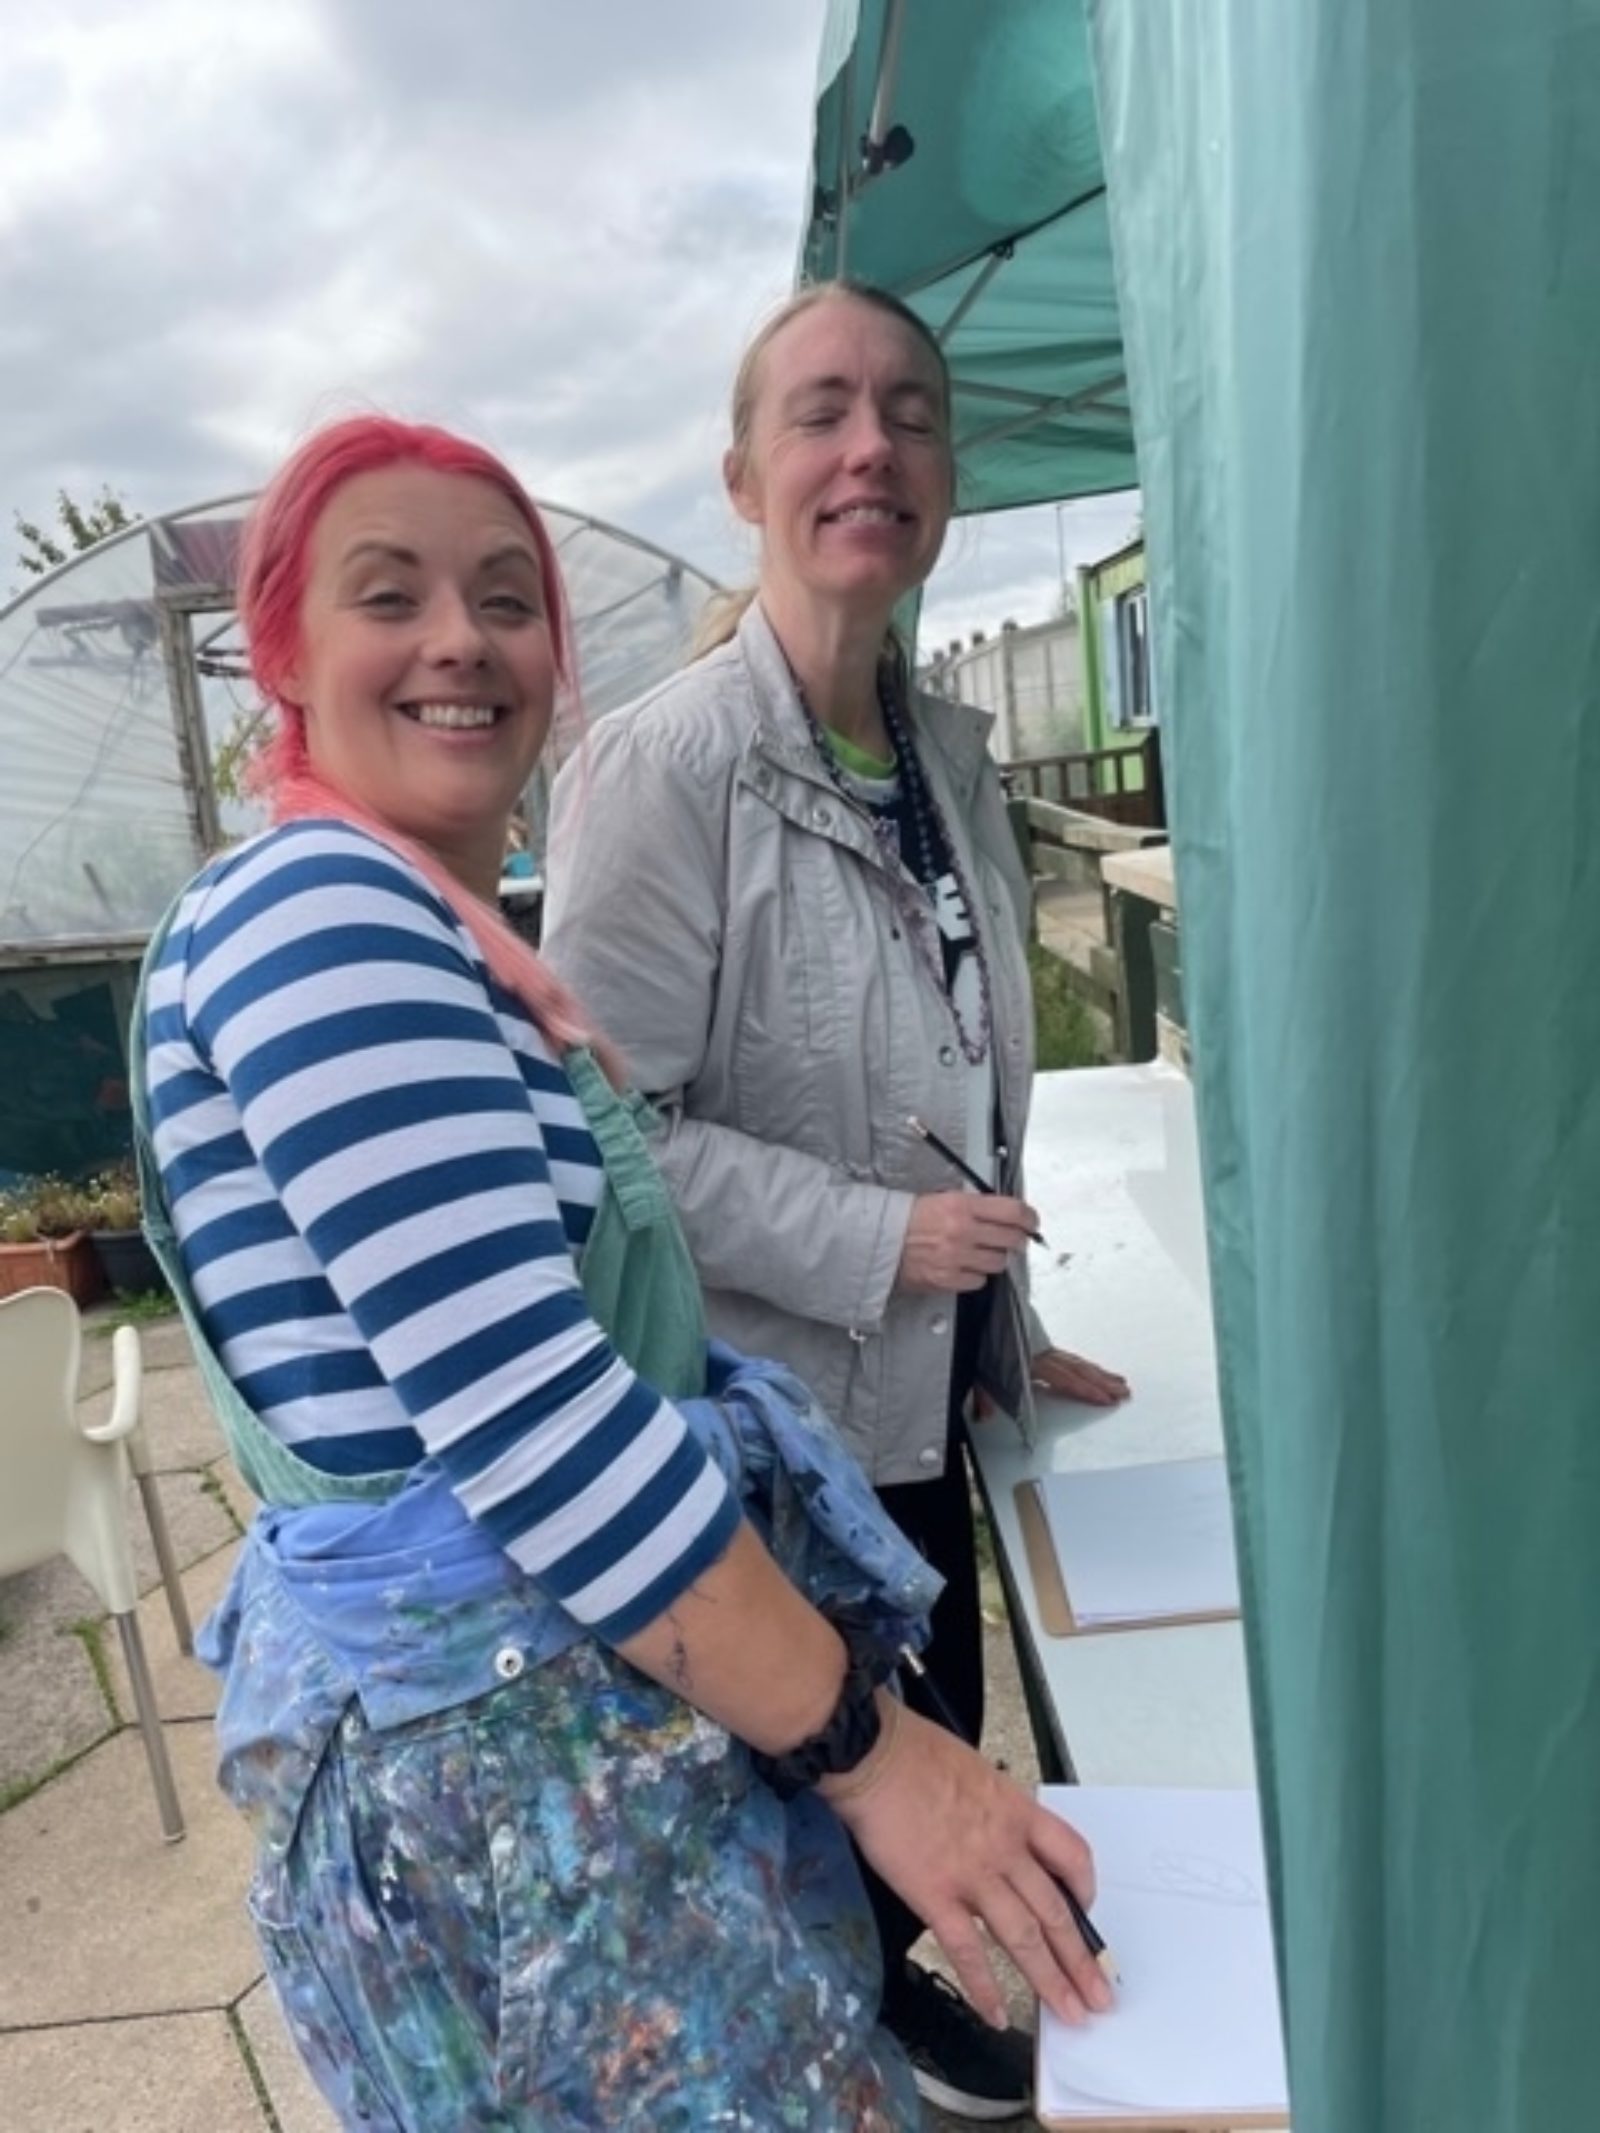 Laura Kate and a member of Buzz Hub St Helens smile for the camera at Incredible Edible community garden with pencils in their hands and paper in front of them.